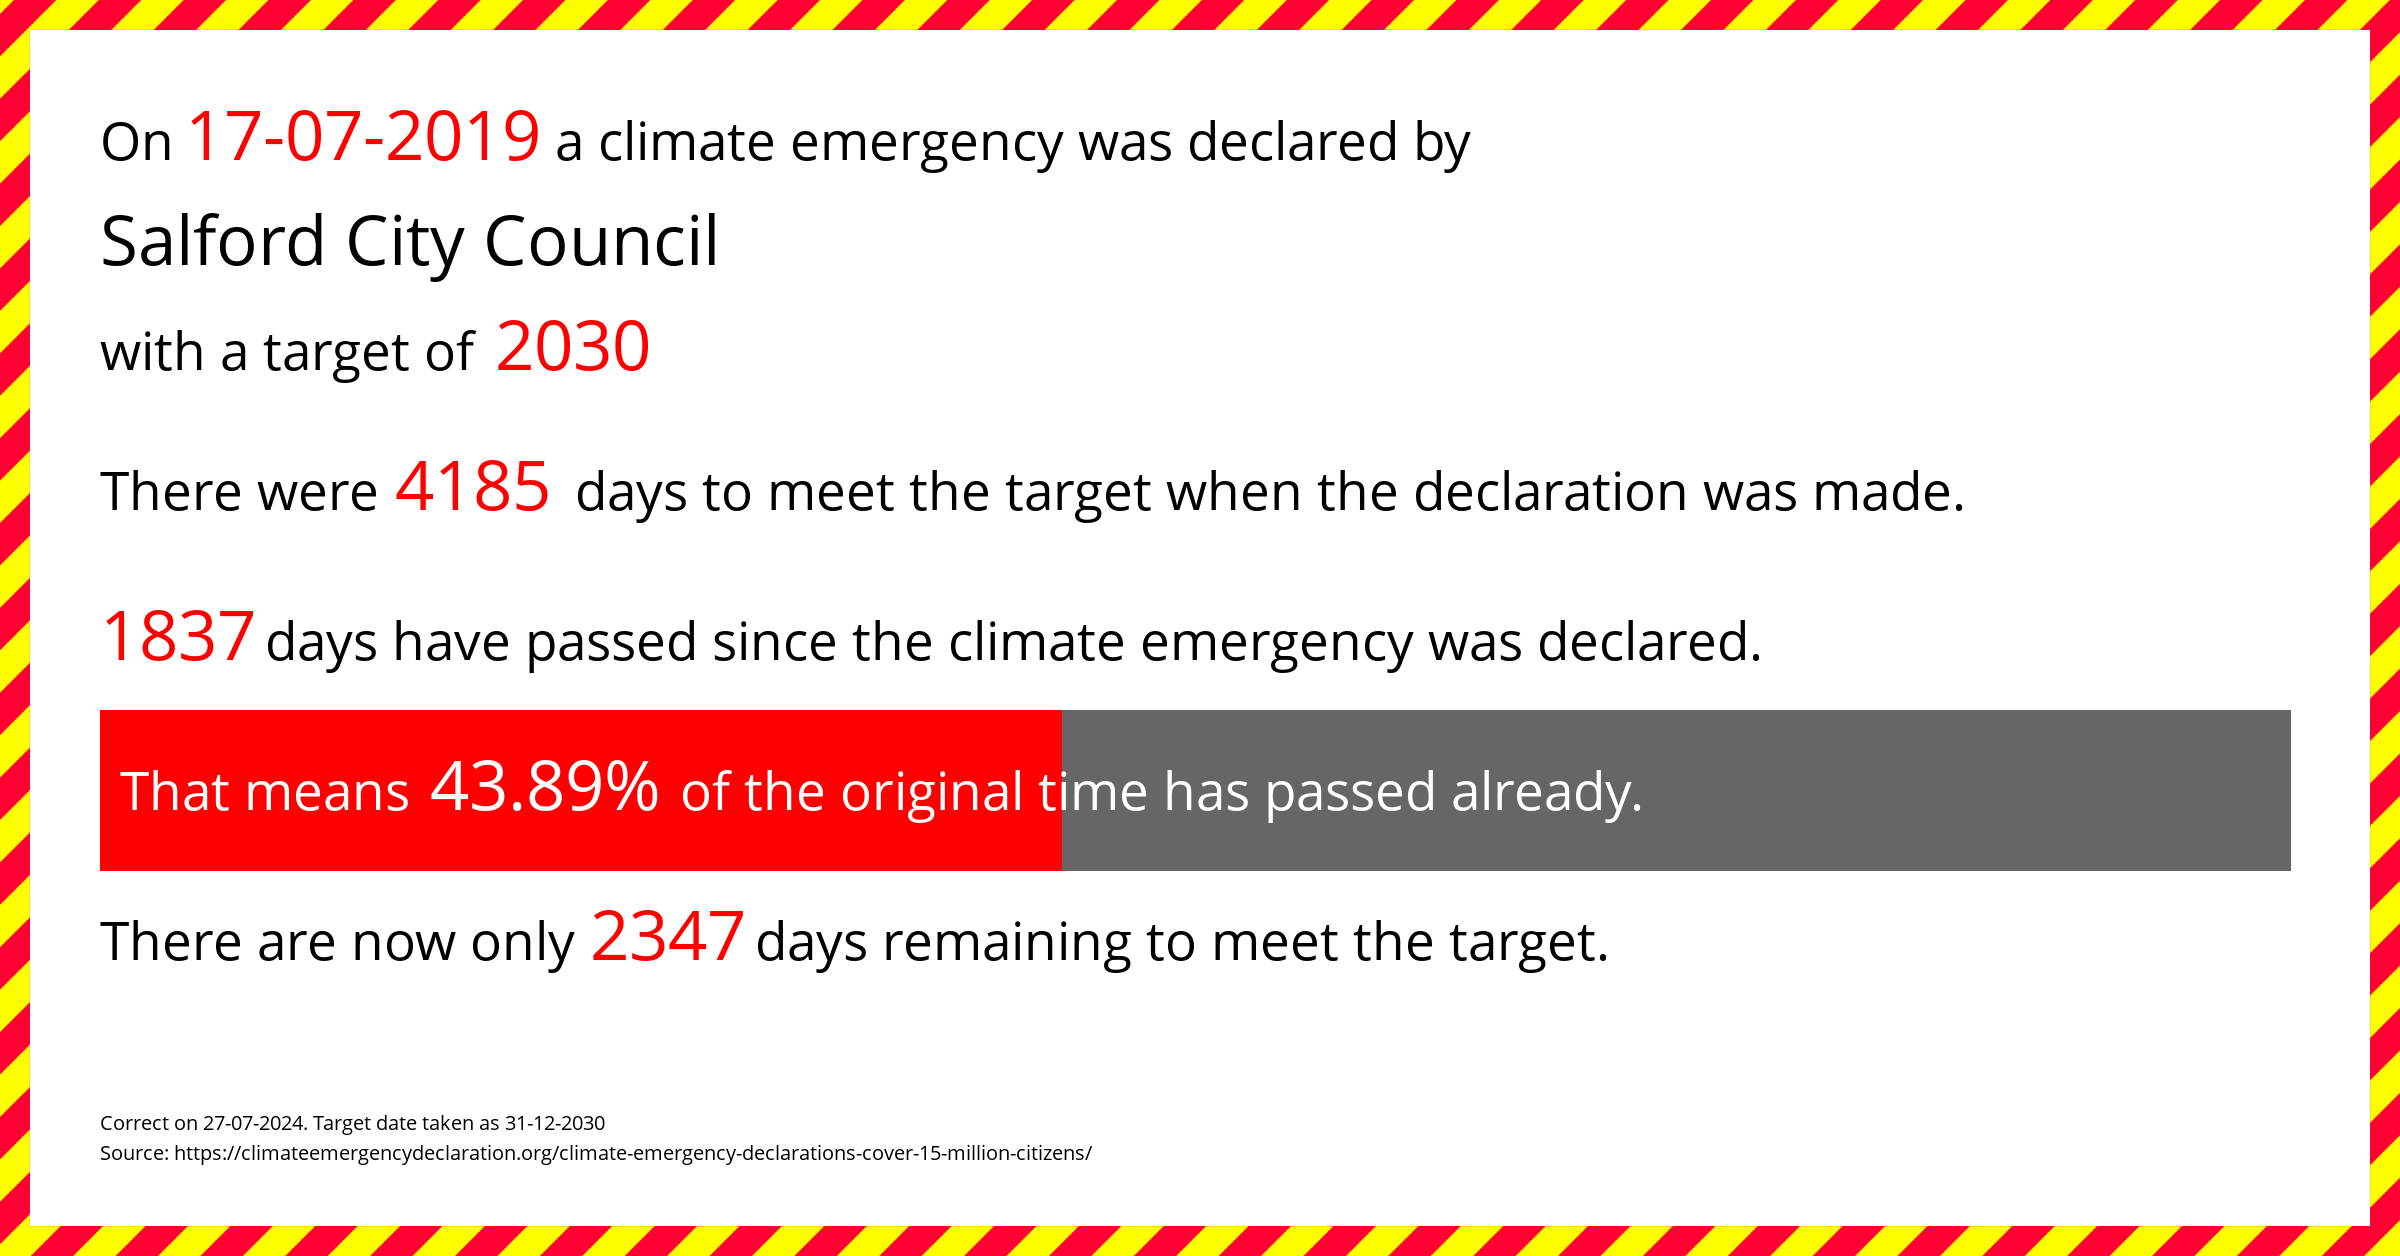 Salford City Council declared a Climate emergency on Wednesday 17th July 2019, with a target of 2030.